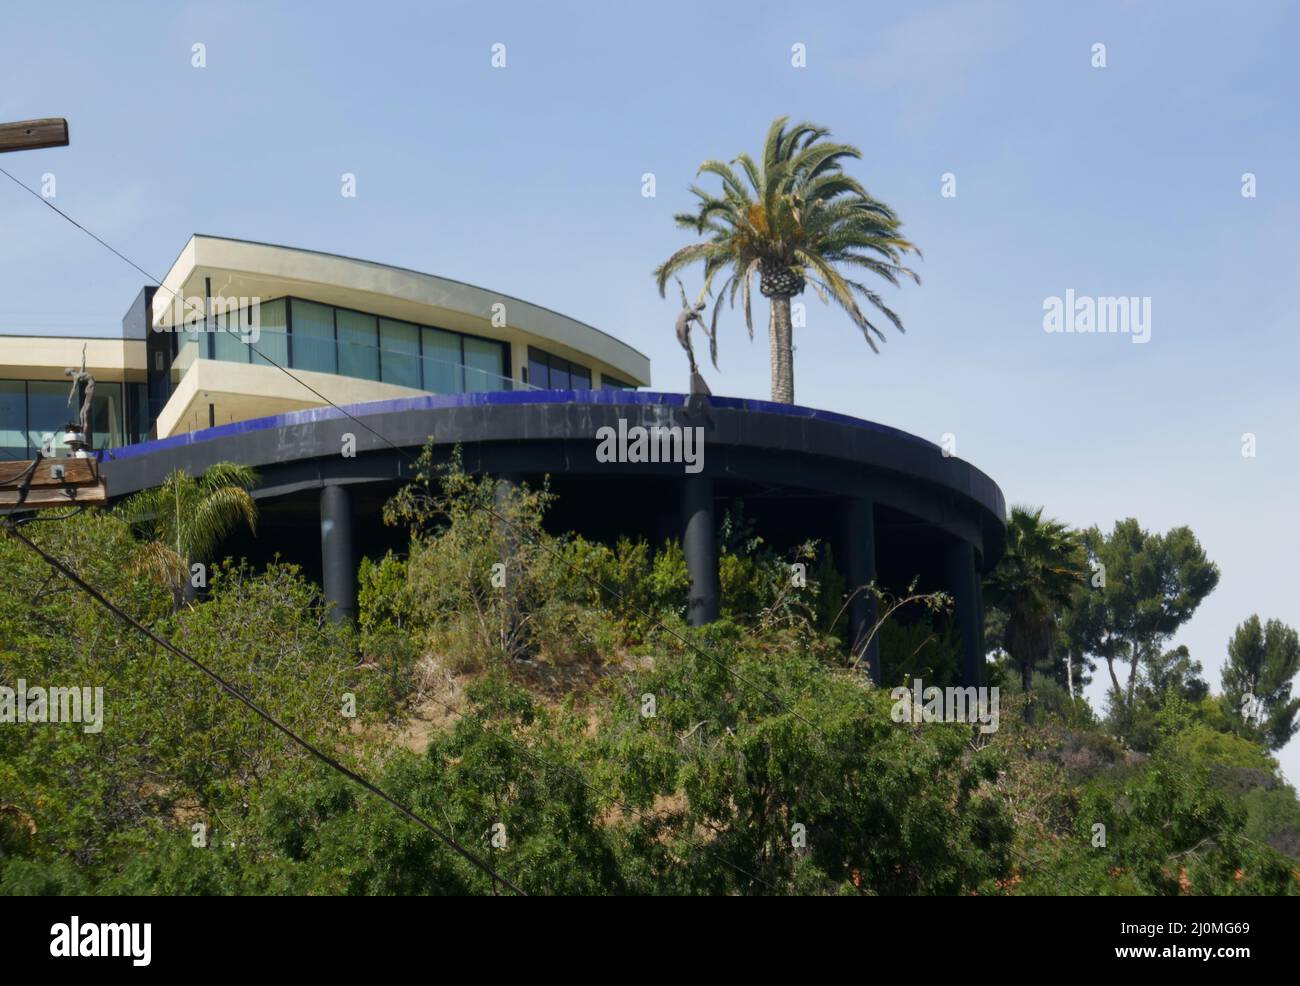 Los Angeles, California, USA 15th March 2022 A general view of atmosphere of Actress Lori Loughlin's Former Home/house on March 15, 2022 in Los Angeles, California, USA. Photo by Barry King/Alamy Stock Photo Stock Photo